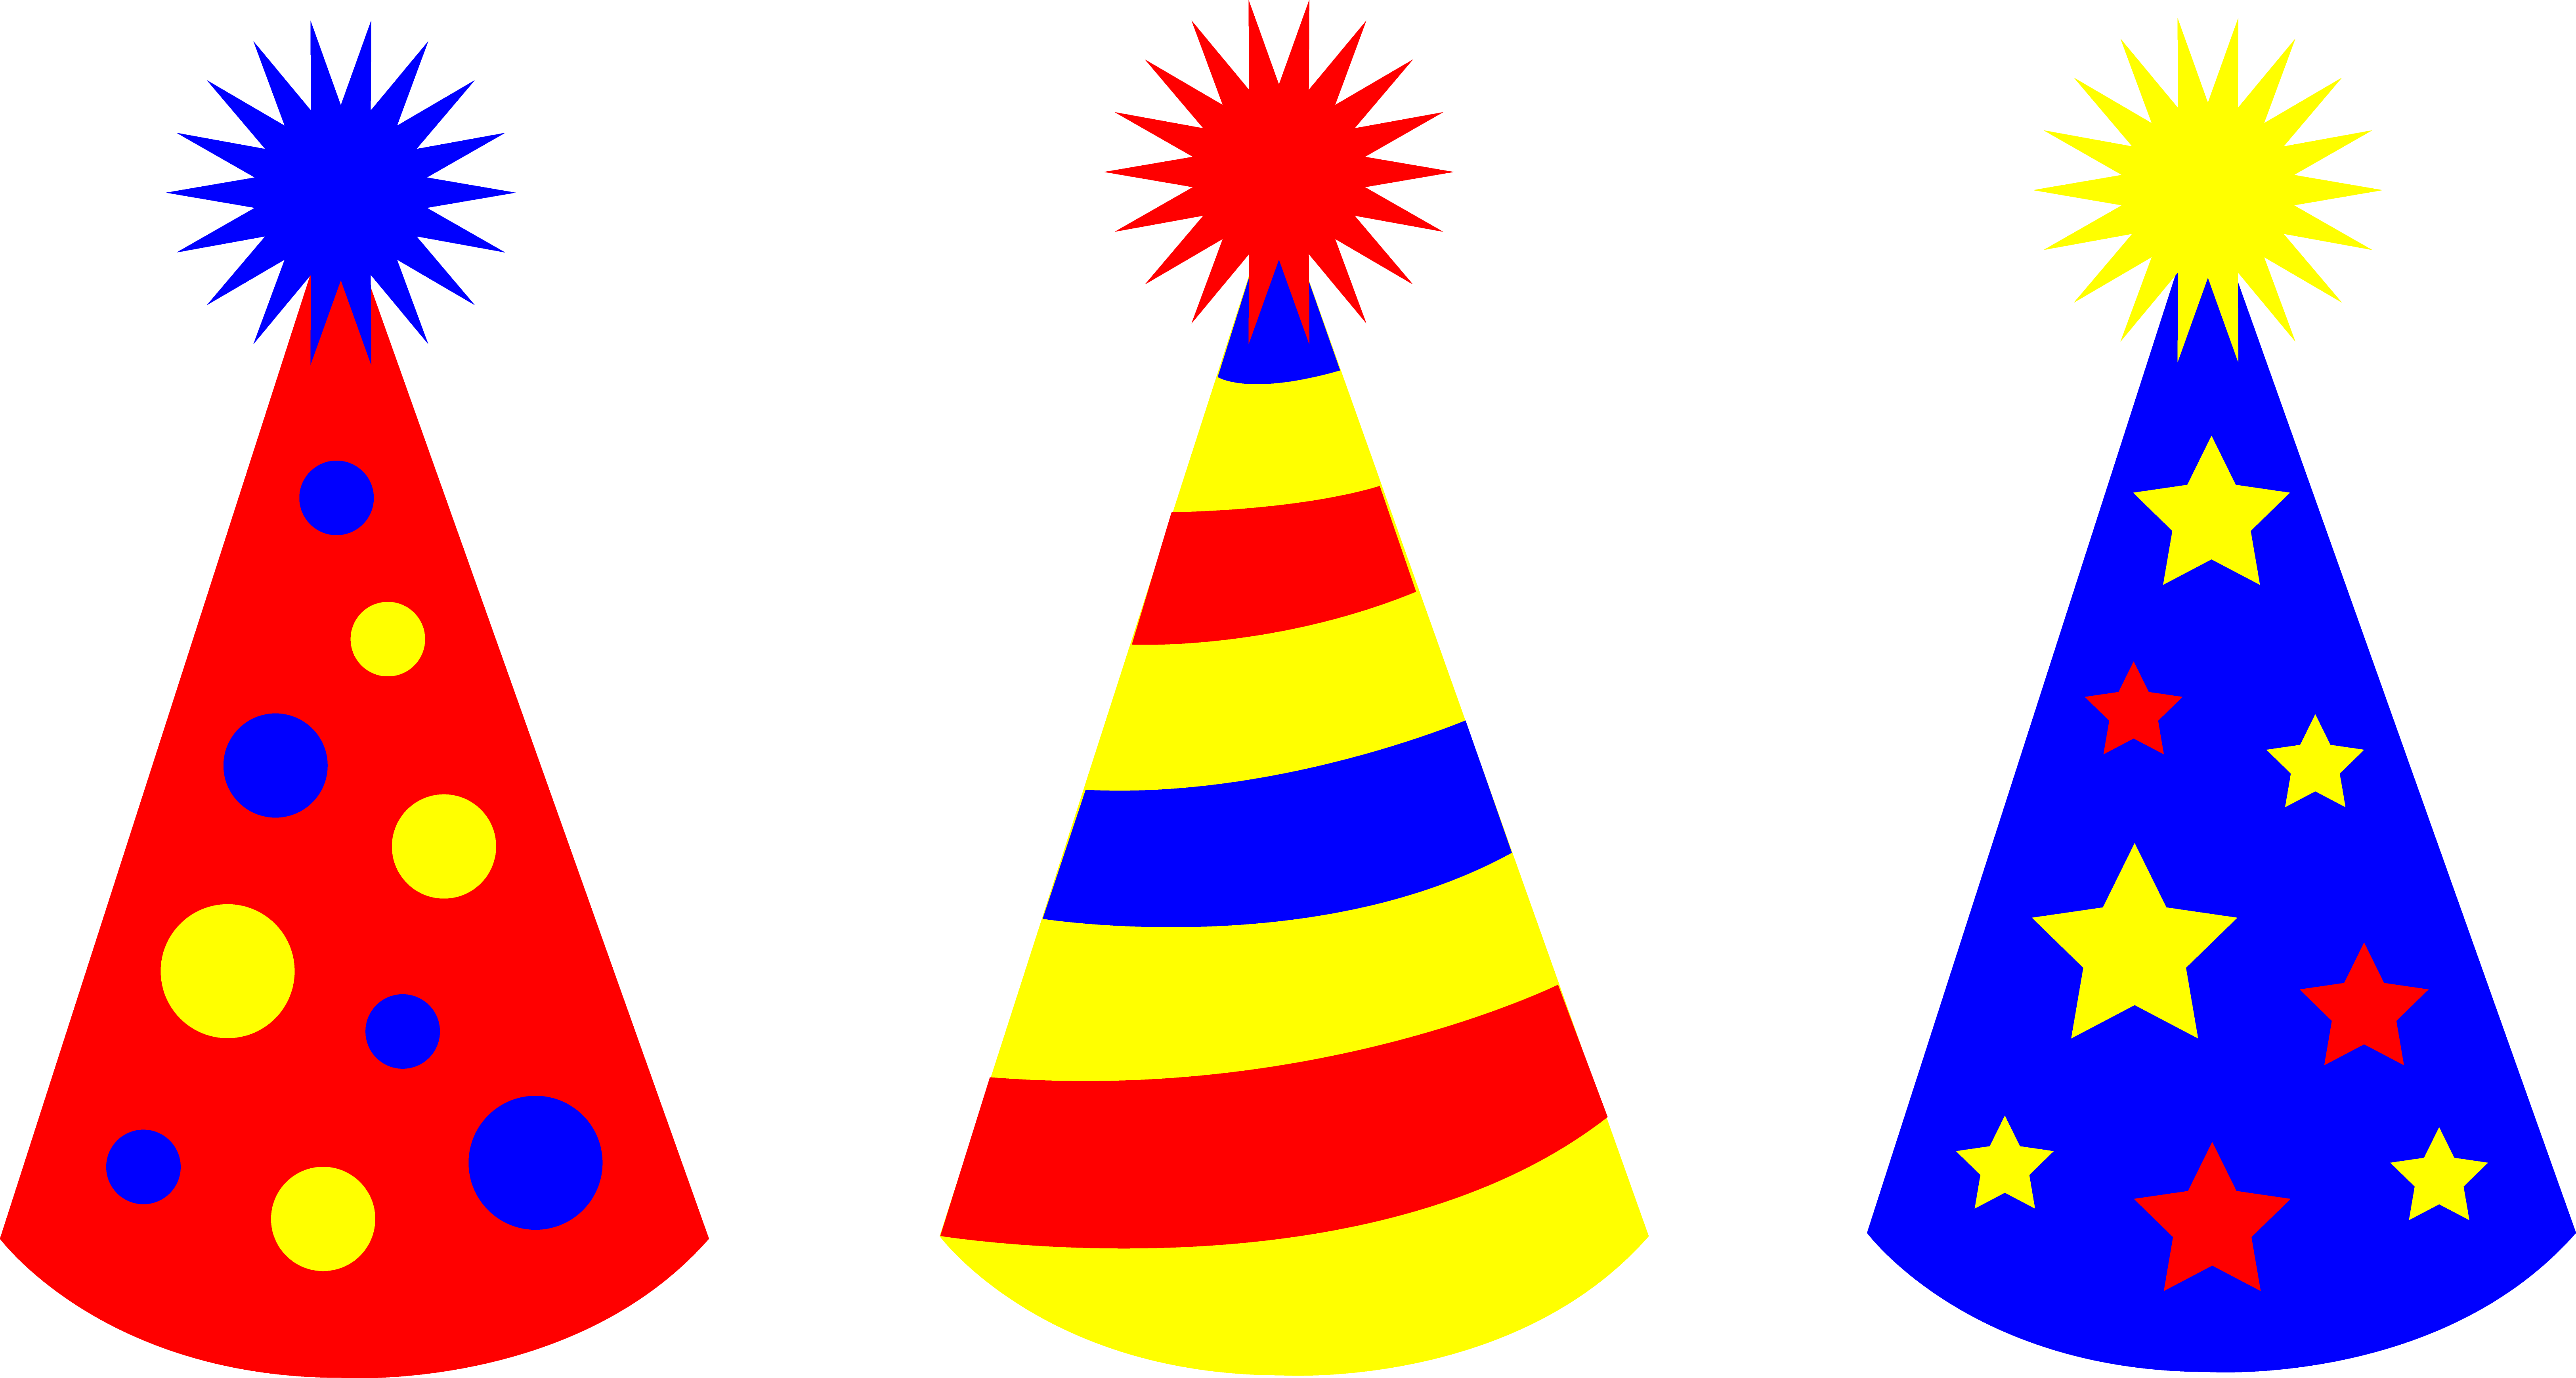 Party Hat Clip Art - clipartall .